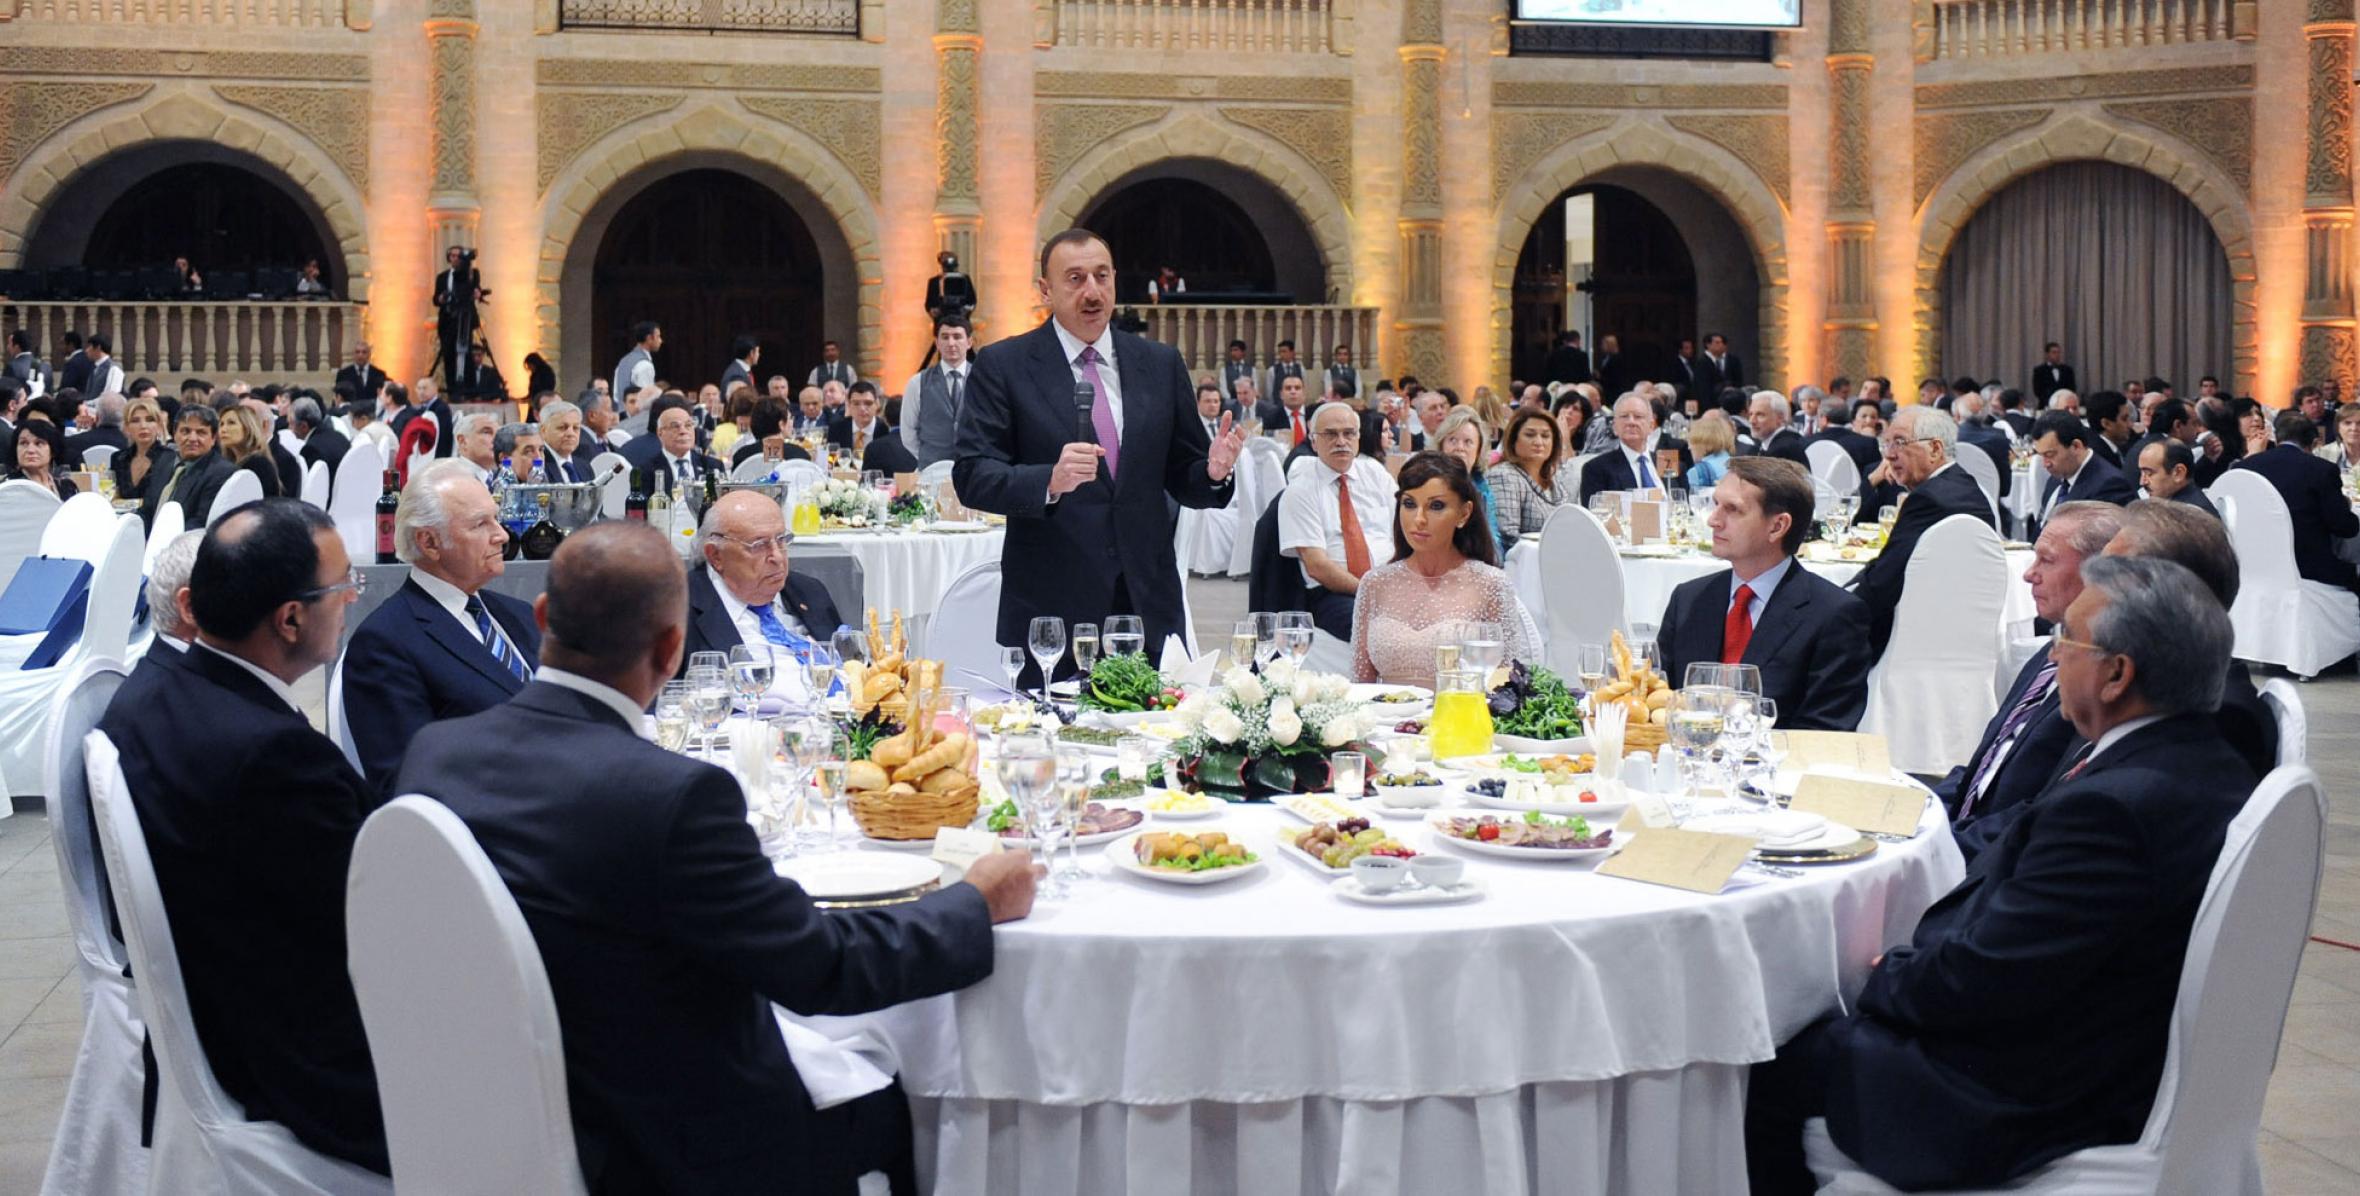 Ilham Aliyev participated in an official reception hosted in honor of the participants of the Baku International Humanitarian Forum